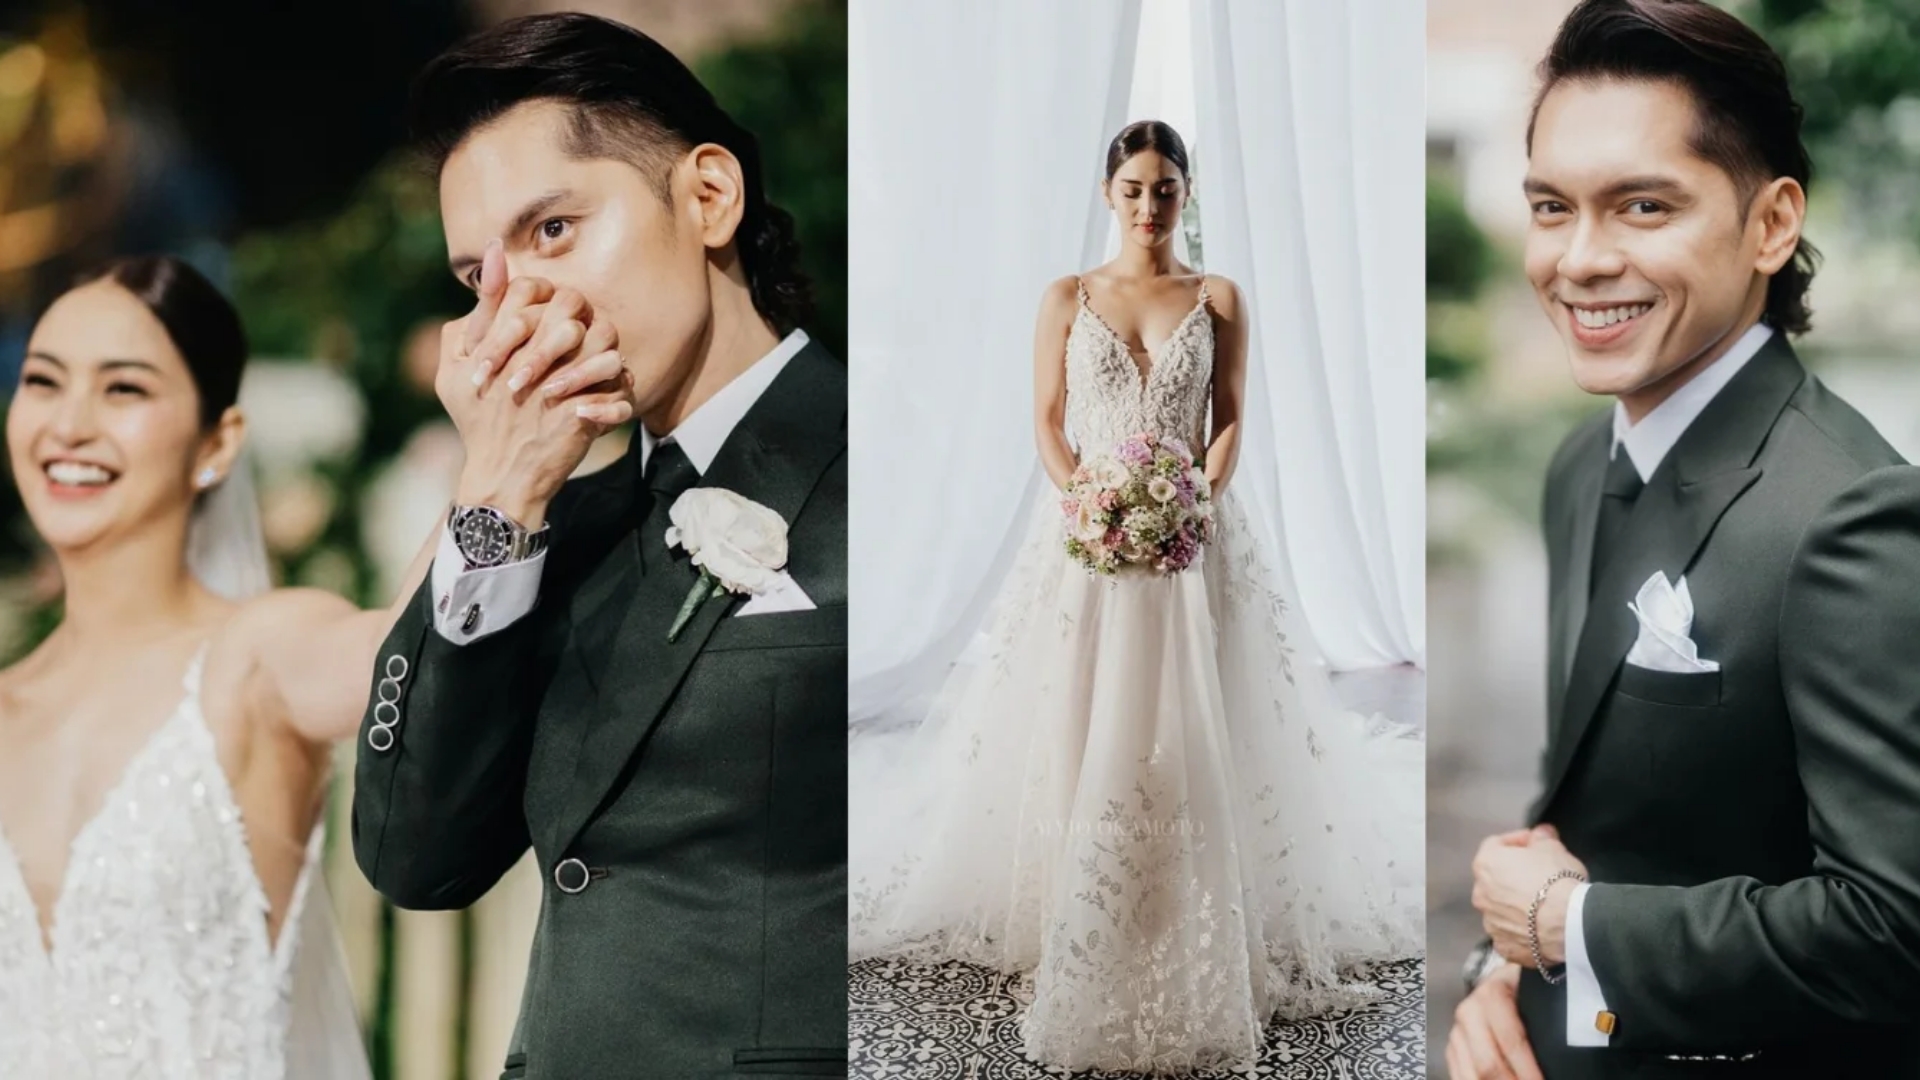 In Silang, Cavite, Carlo Aquino and Charlie Dizon get married.